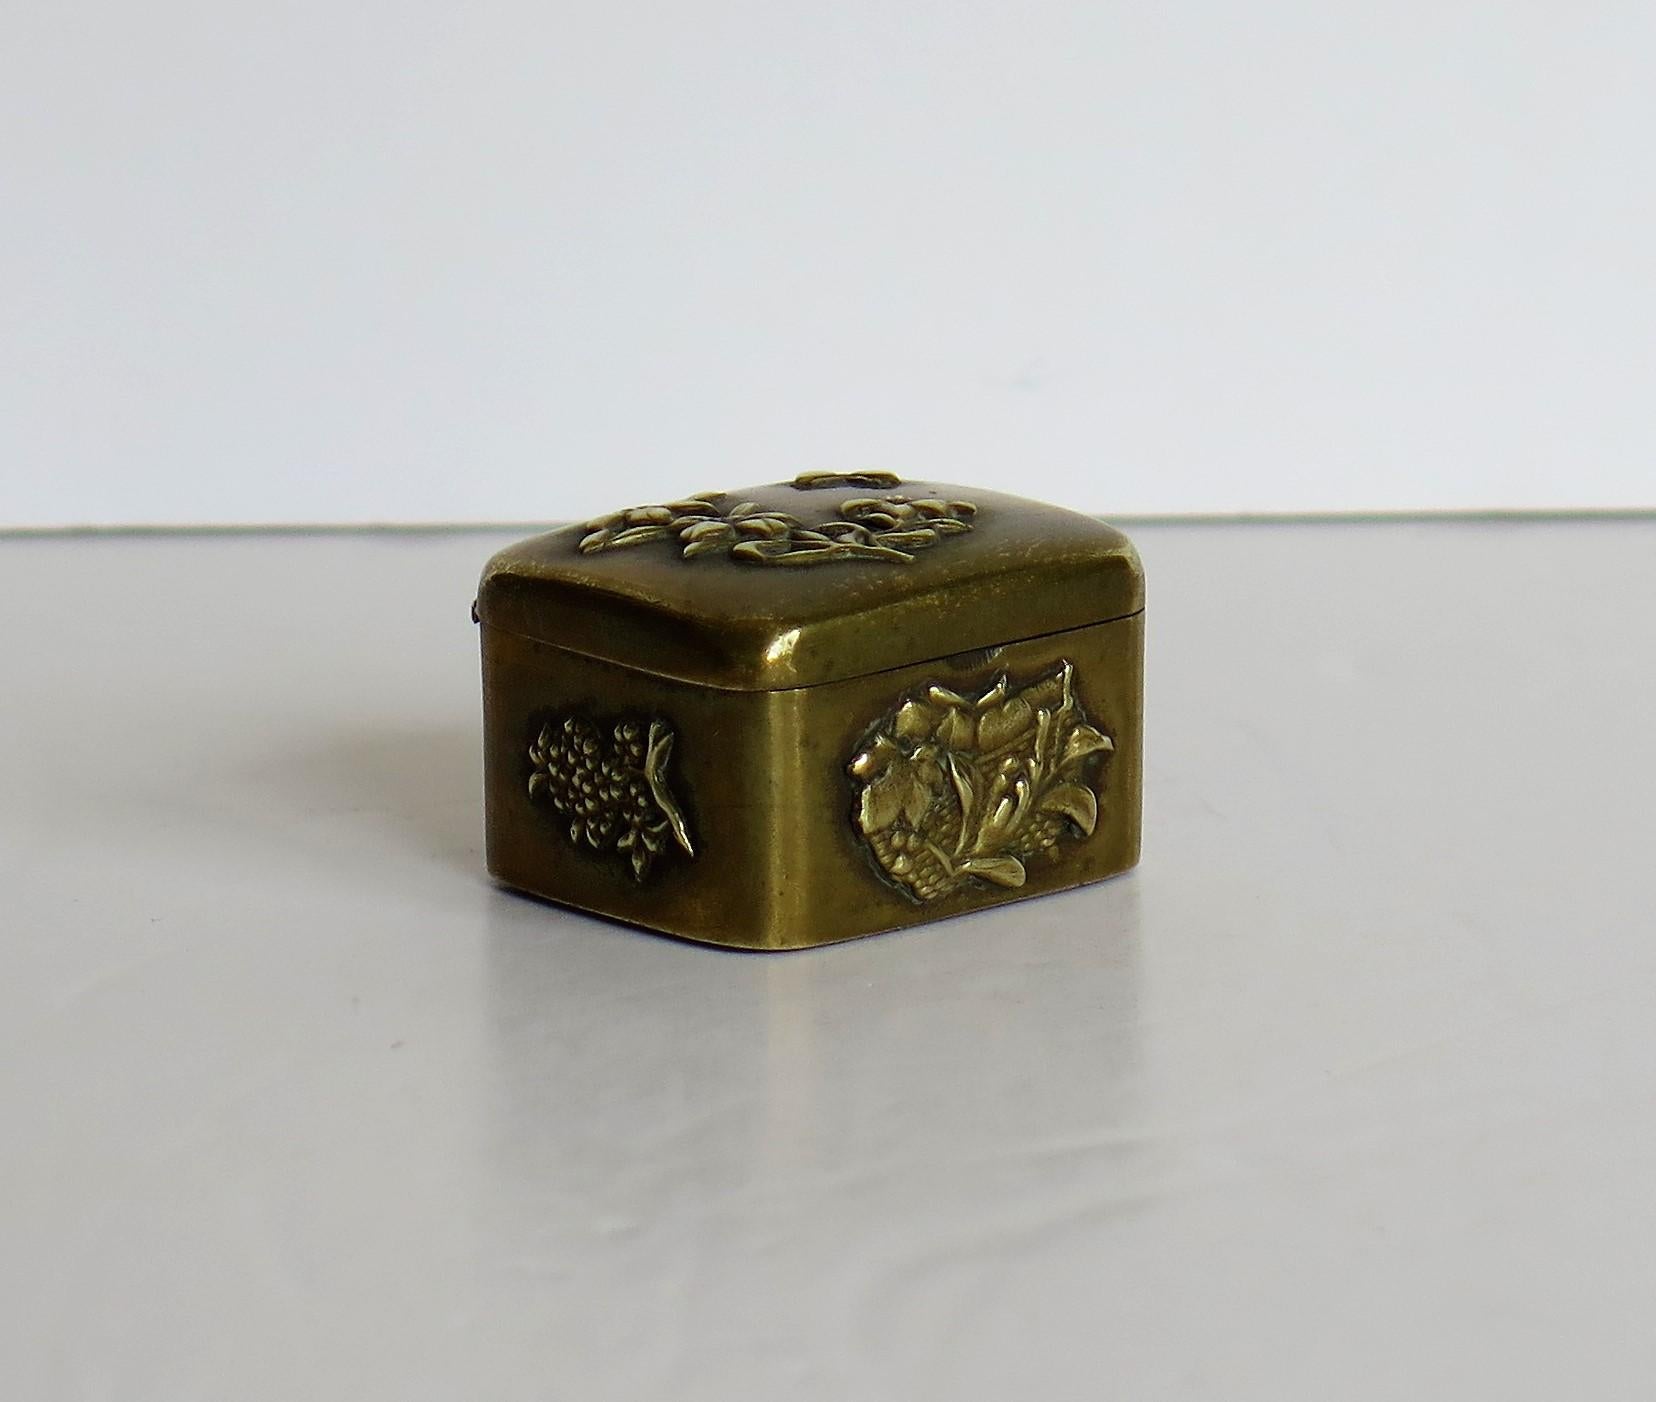 it is a small bronze box with